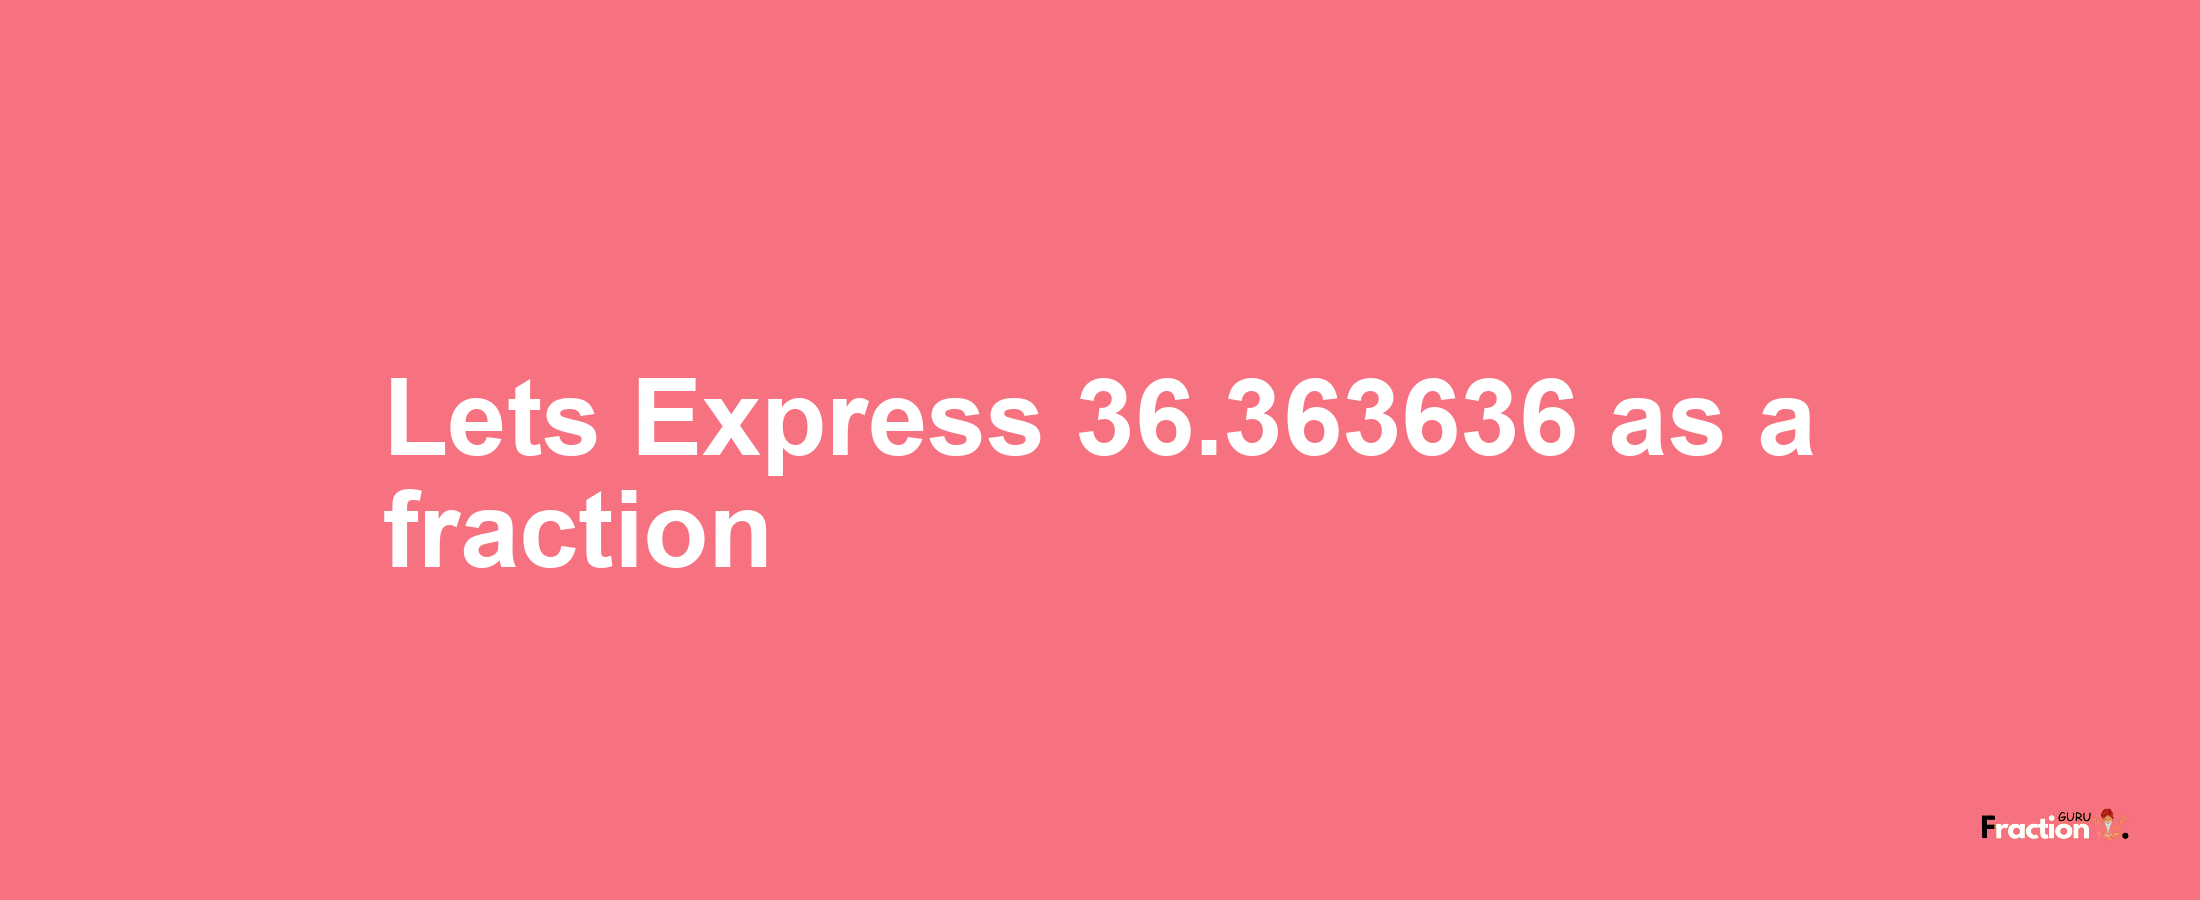 Lets Express 36.363636 as afraction